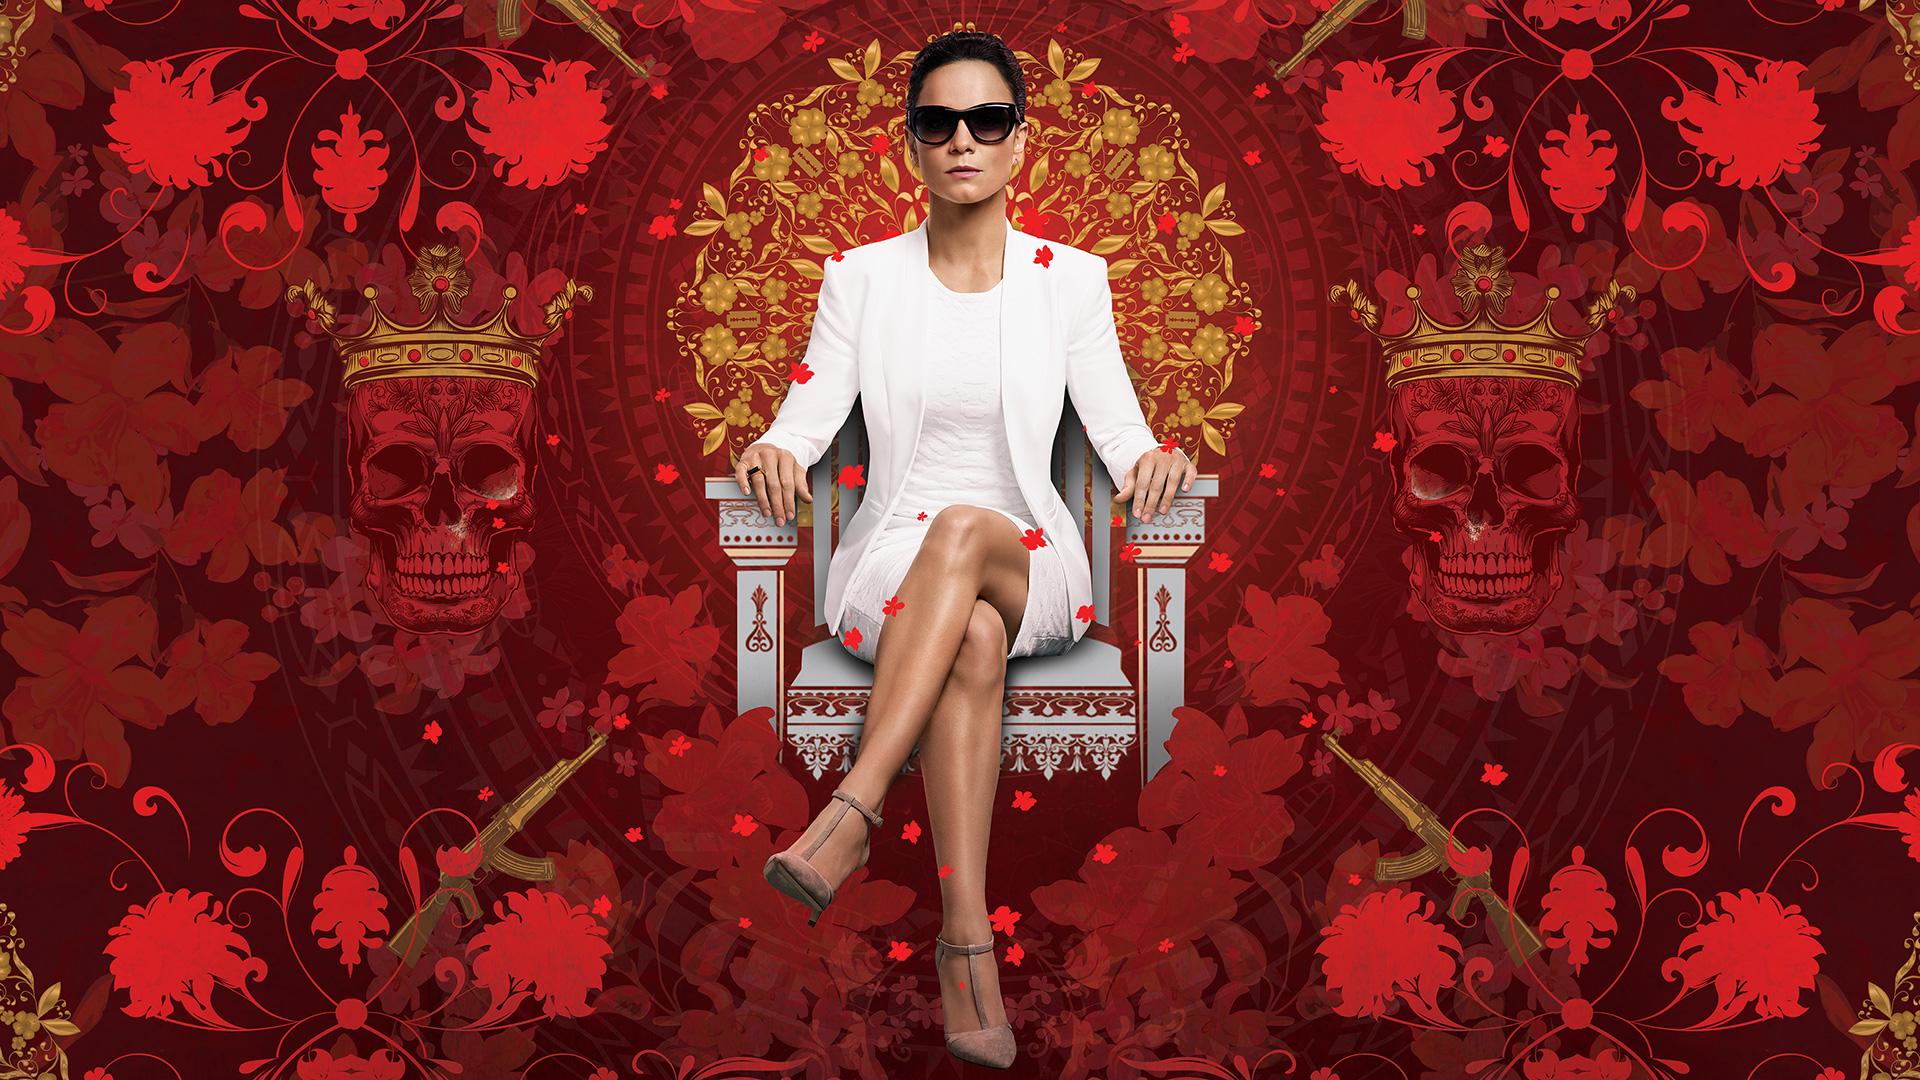 TV Show Queen of the South HD Wallpaper Background Image. 